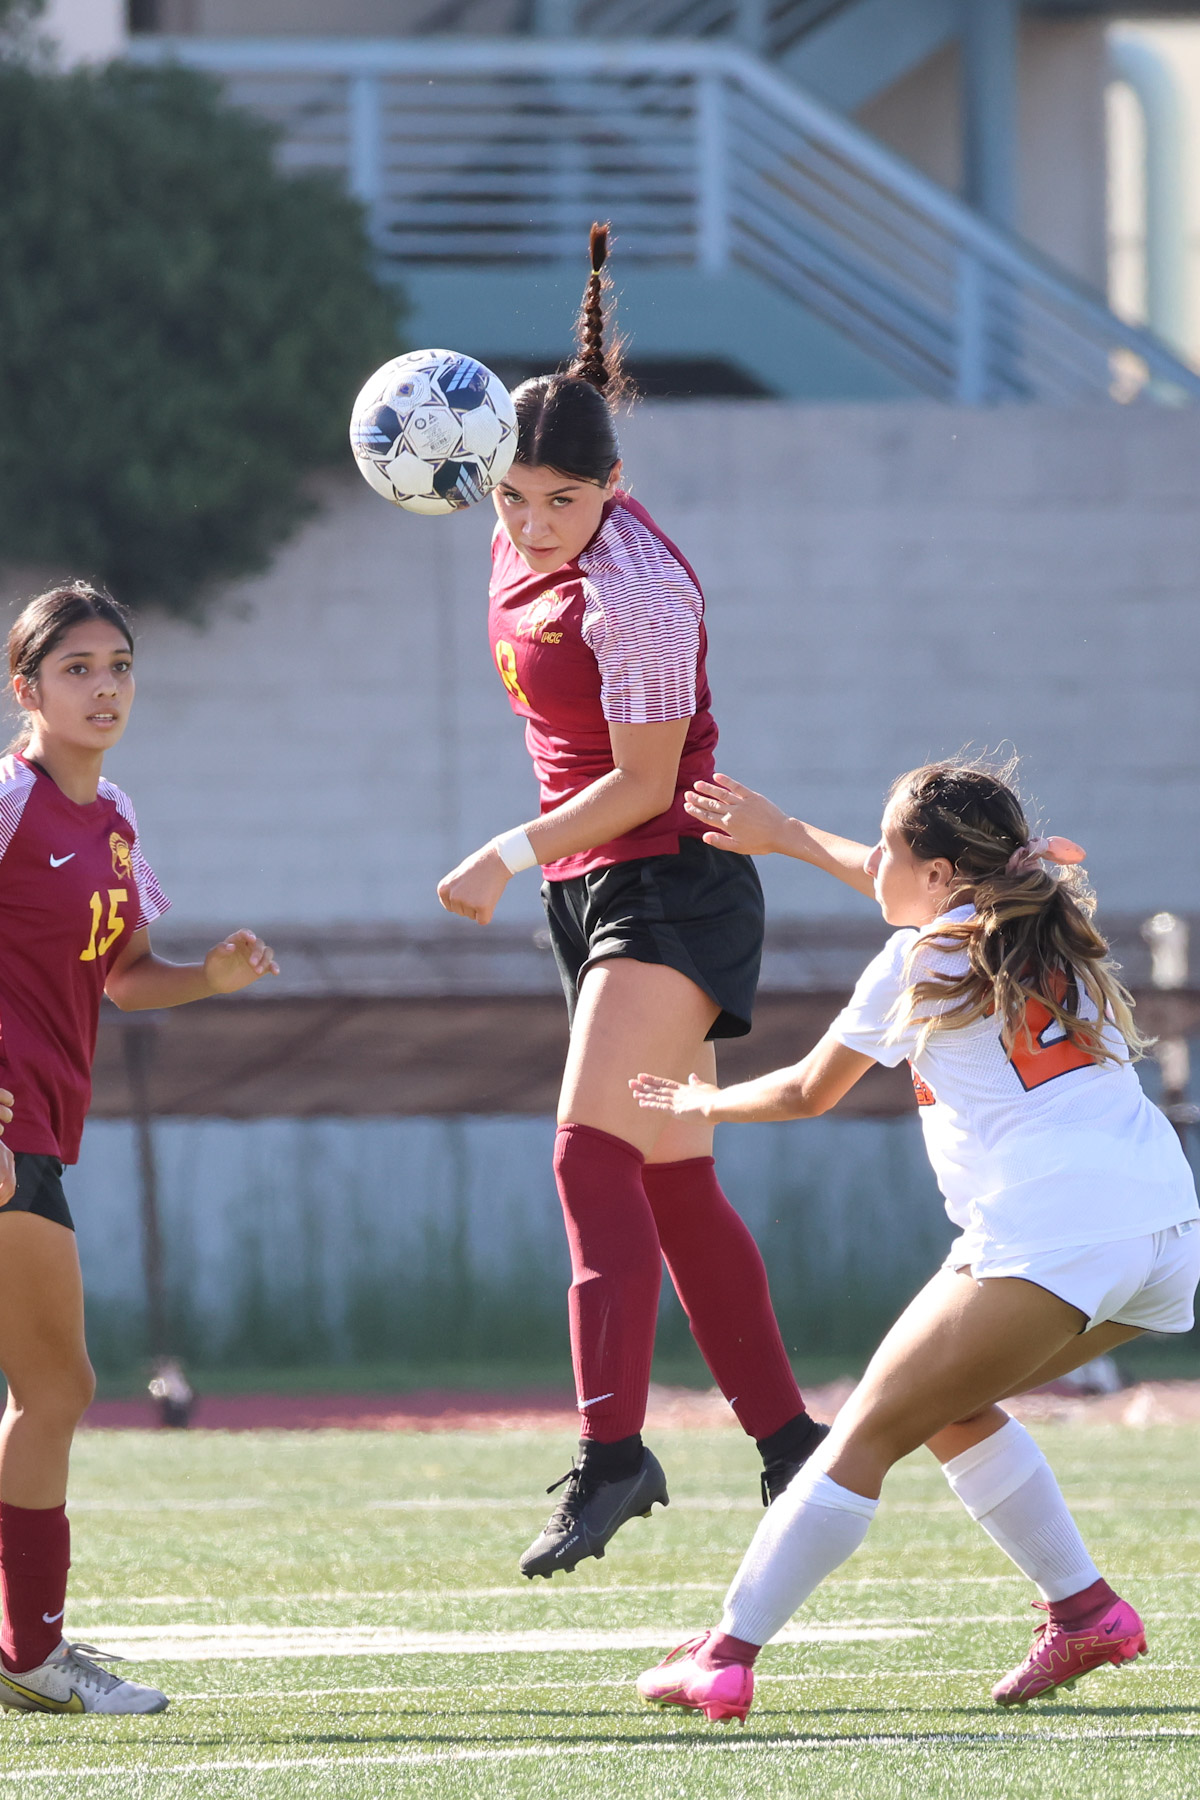 Destiny Delgado with the header here during PCC's win over Citrus (photo by Richard Quinton).